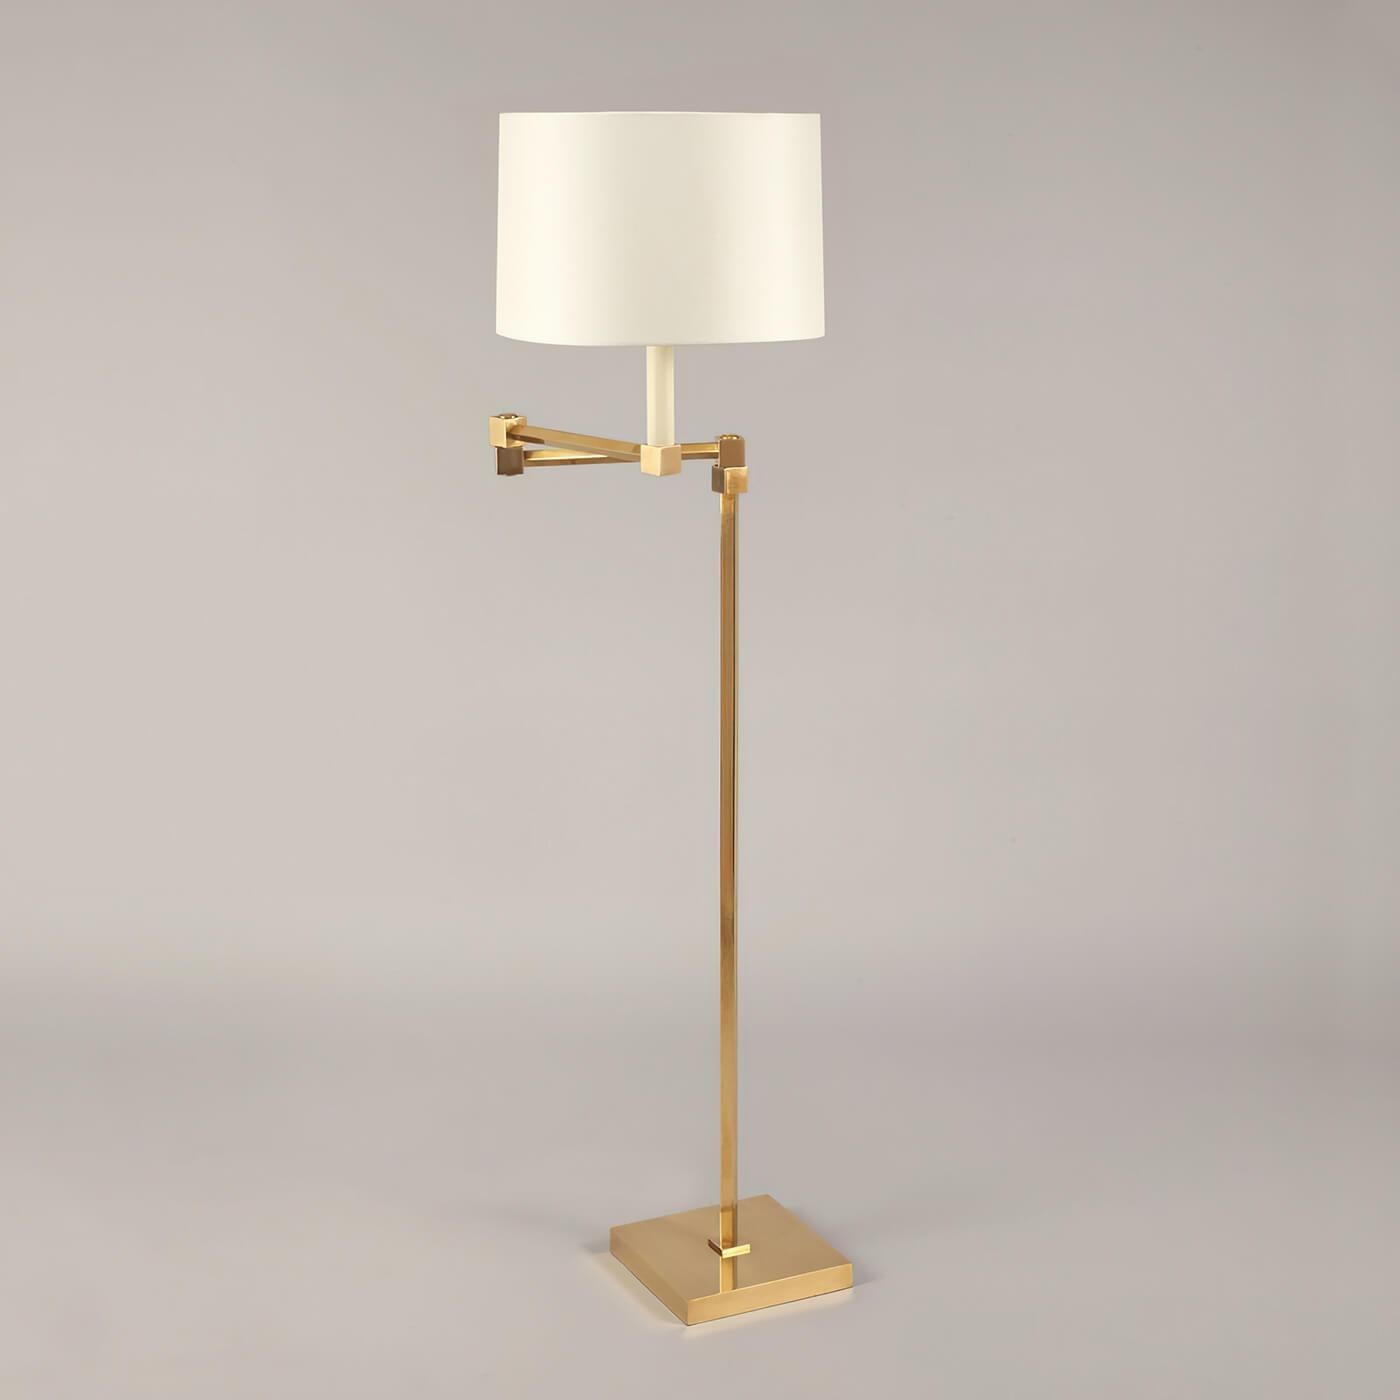 Classic Modern brass floor lamp, defined by its strong, cube-shaped design and square base, this floor lamp has universal appeal. The adjustable arm has cubed joints, which mirror the square candle holder.

The base material is solid cast brass